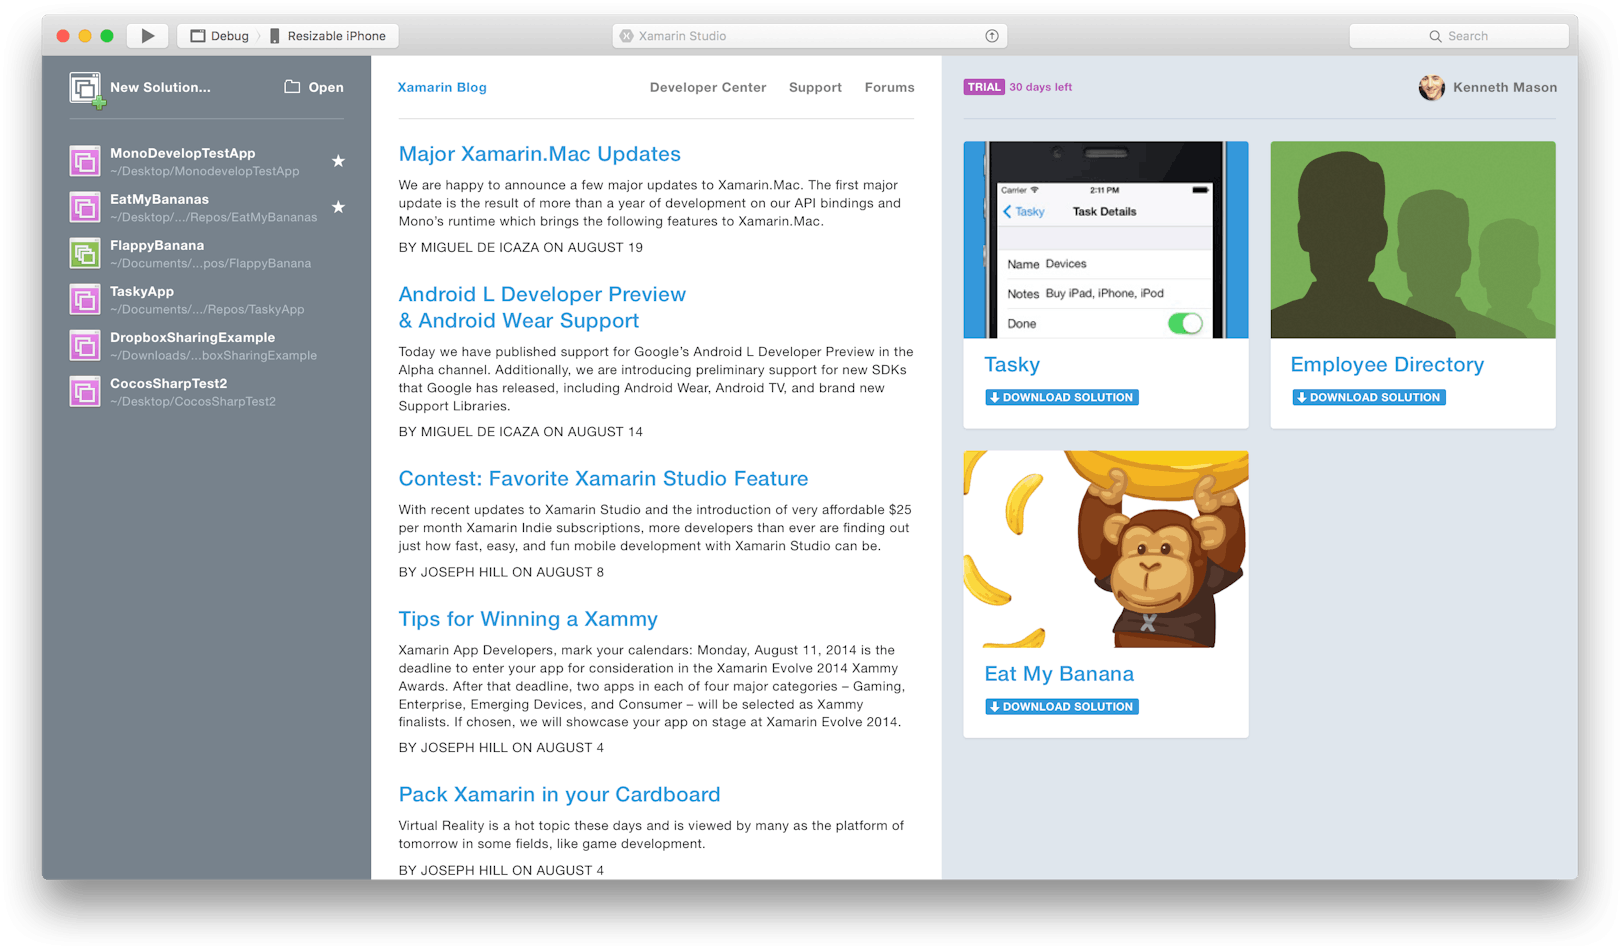 The visual aesthetics of macOS transitioned from shaded icons and UI to a flat design. Xamarin Studio also underwent changes during this period and introduced a large set of icons that I created for it, gradually replacing the old shaded icons.